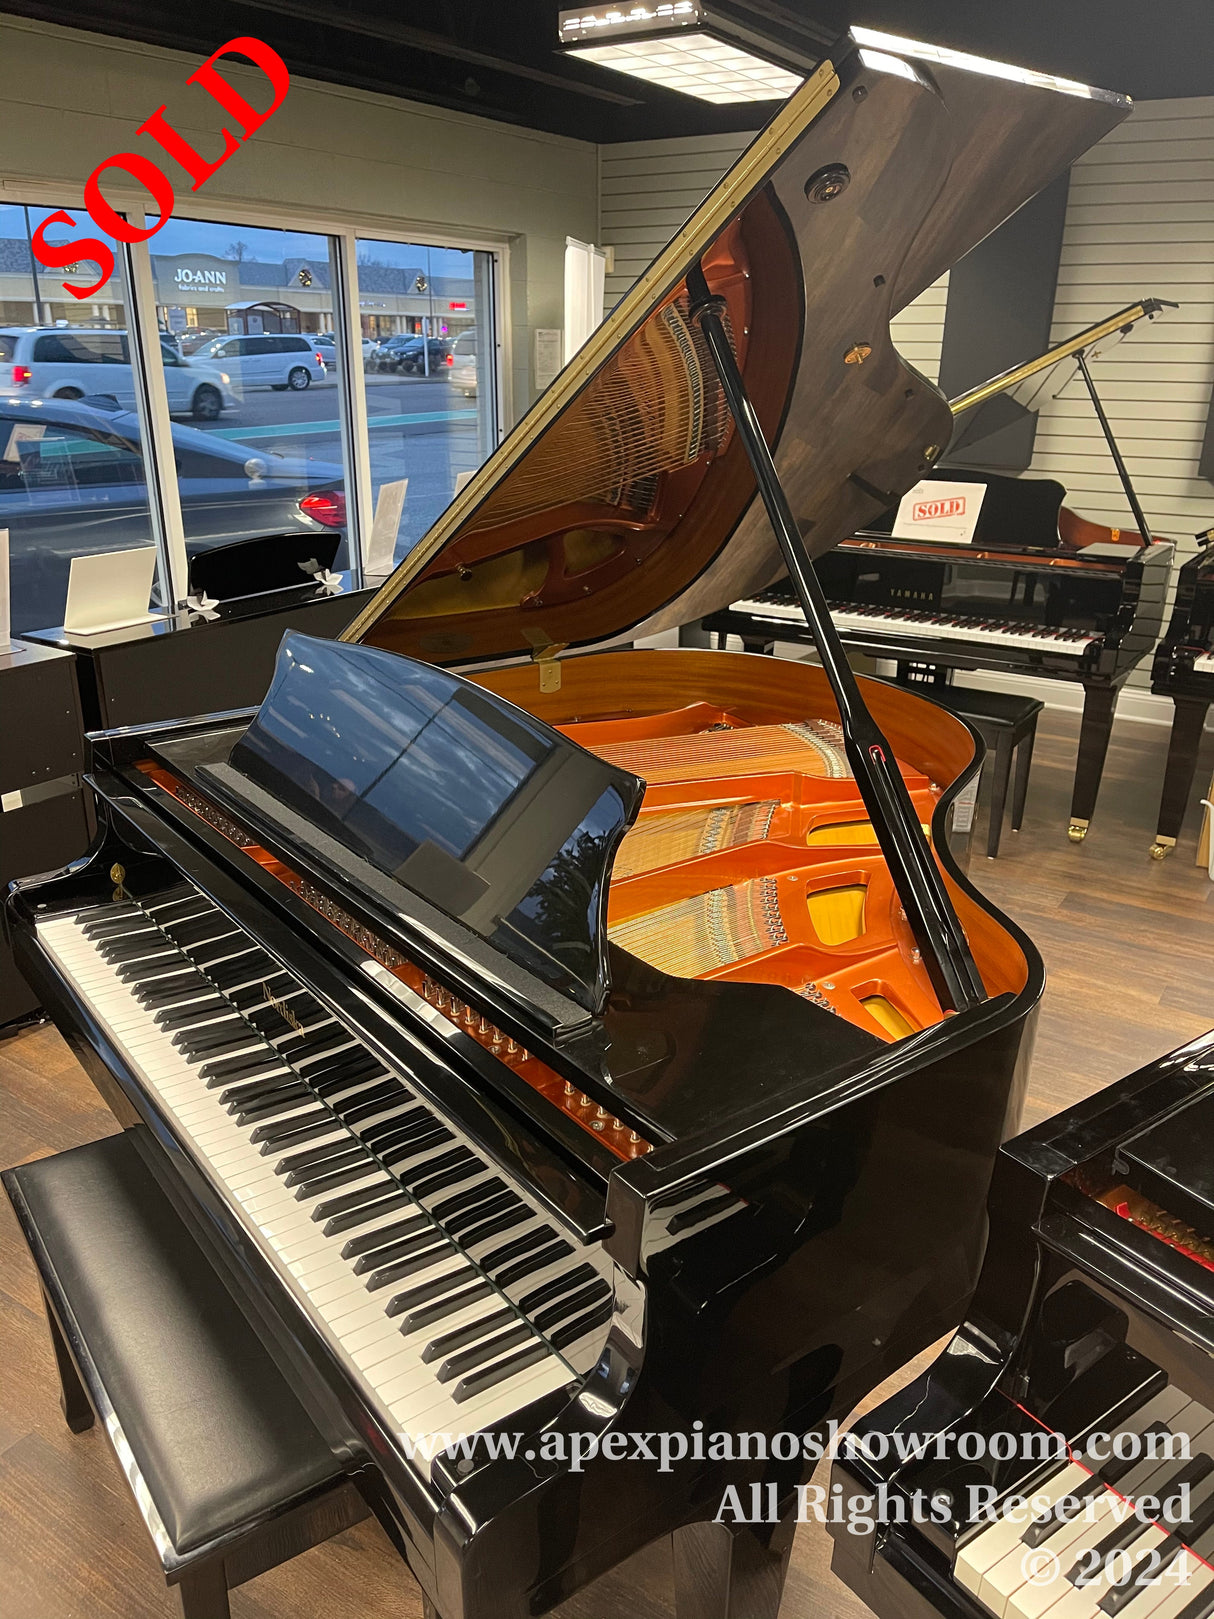 A high-gloss black grand piano with its lid open, showcasing the intricate internal string and hammer mechanism, placed inside a piano showroom with a bright interior and additional pianos in the background.